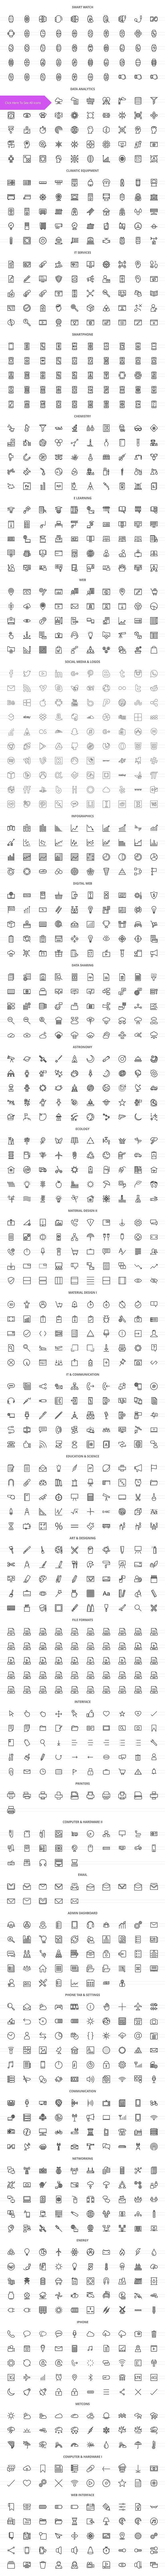 1440 Science & Technology Line Icons in Graphics - product preview 1